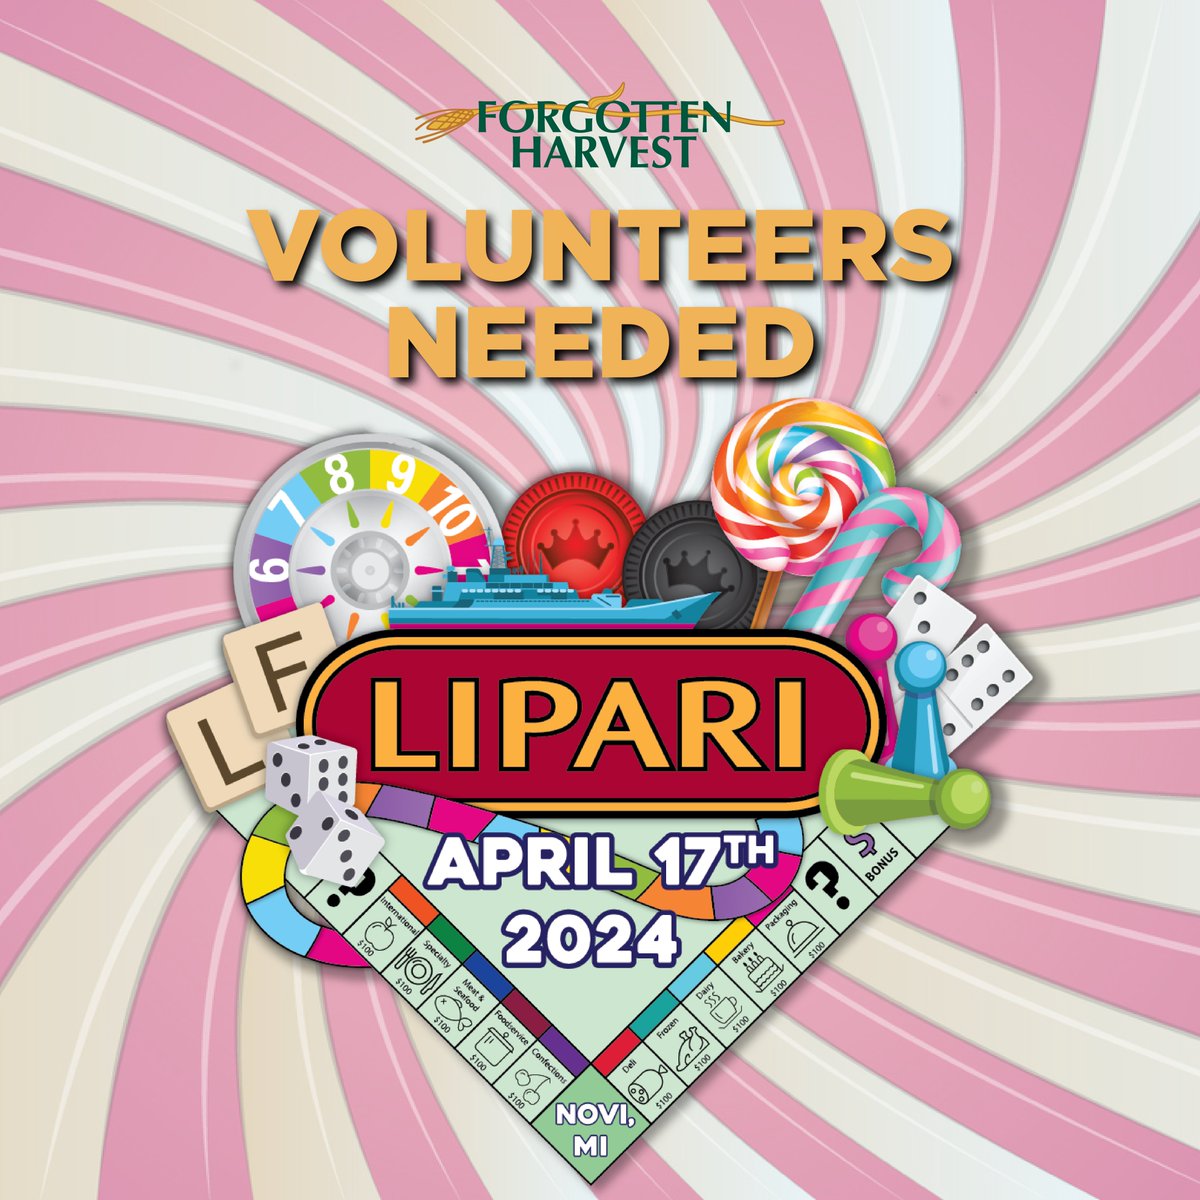 The Lipari Food Show is the largest food show rescue of the year! Volunteers will collect food products left over from the exhibit, vendor tables, and booths at the end of the show. In 2019 we rescued 75,000+ pounds of food in one night. Sign up now. 👉 bit.ly/3woIbDN